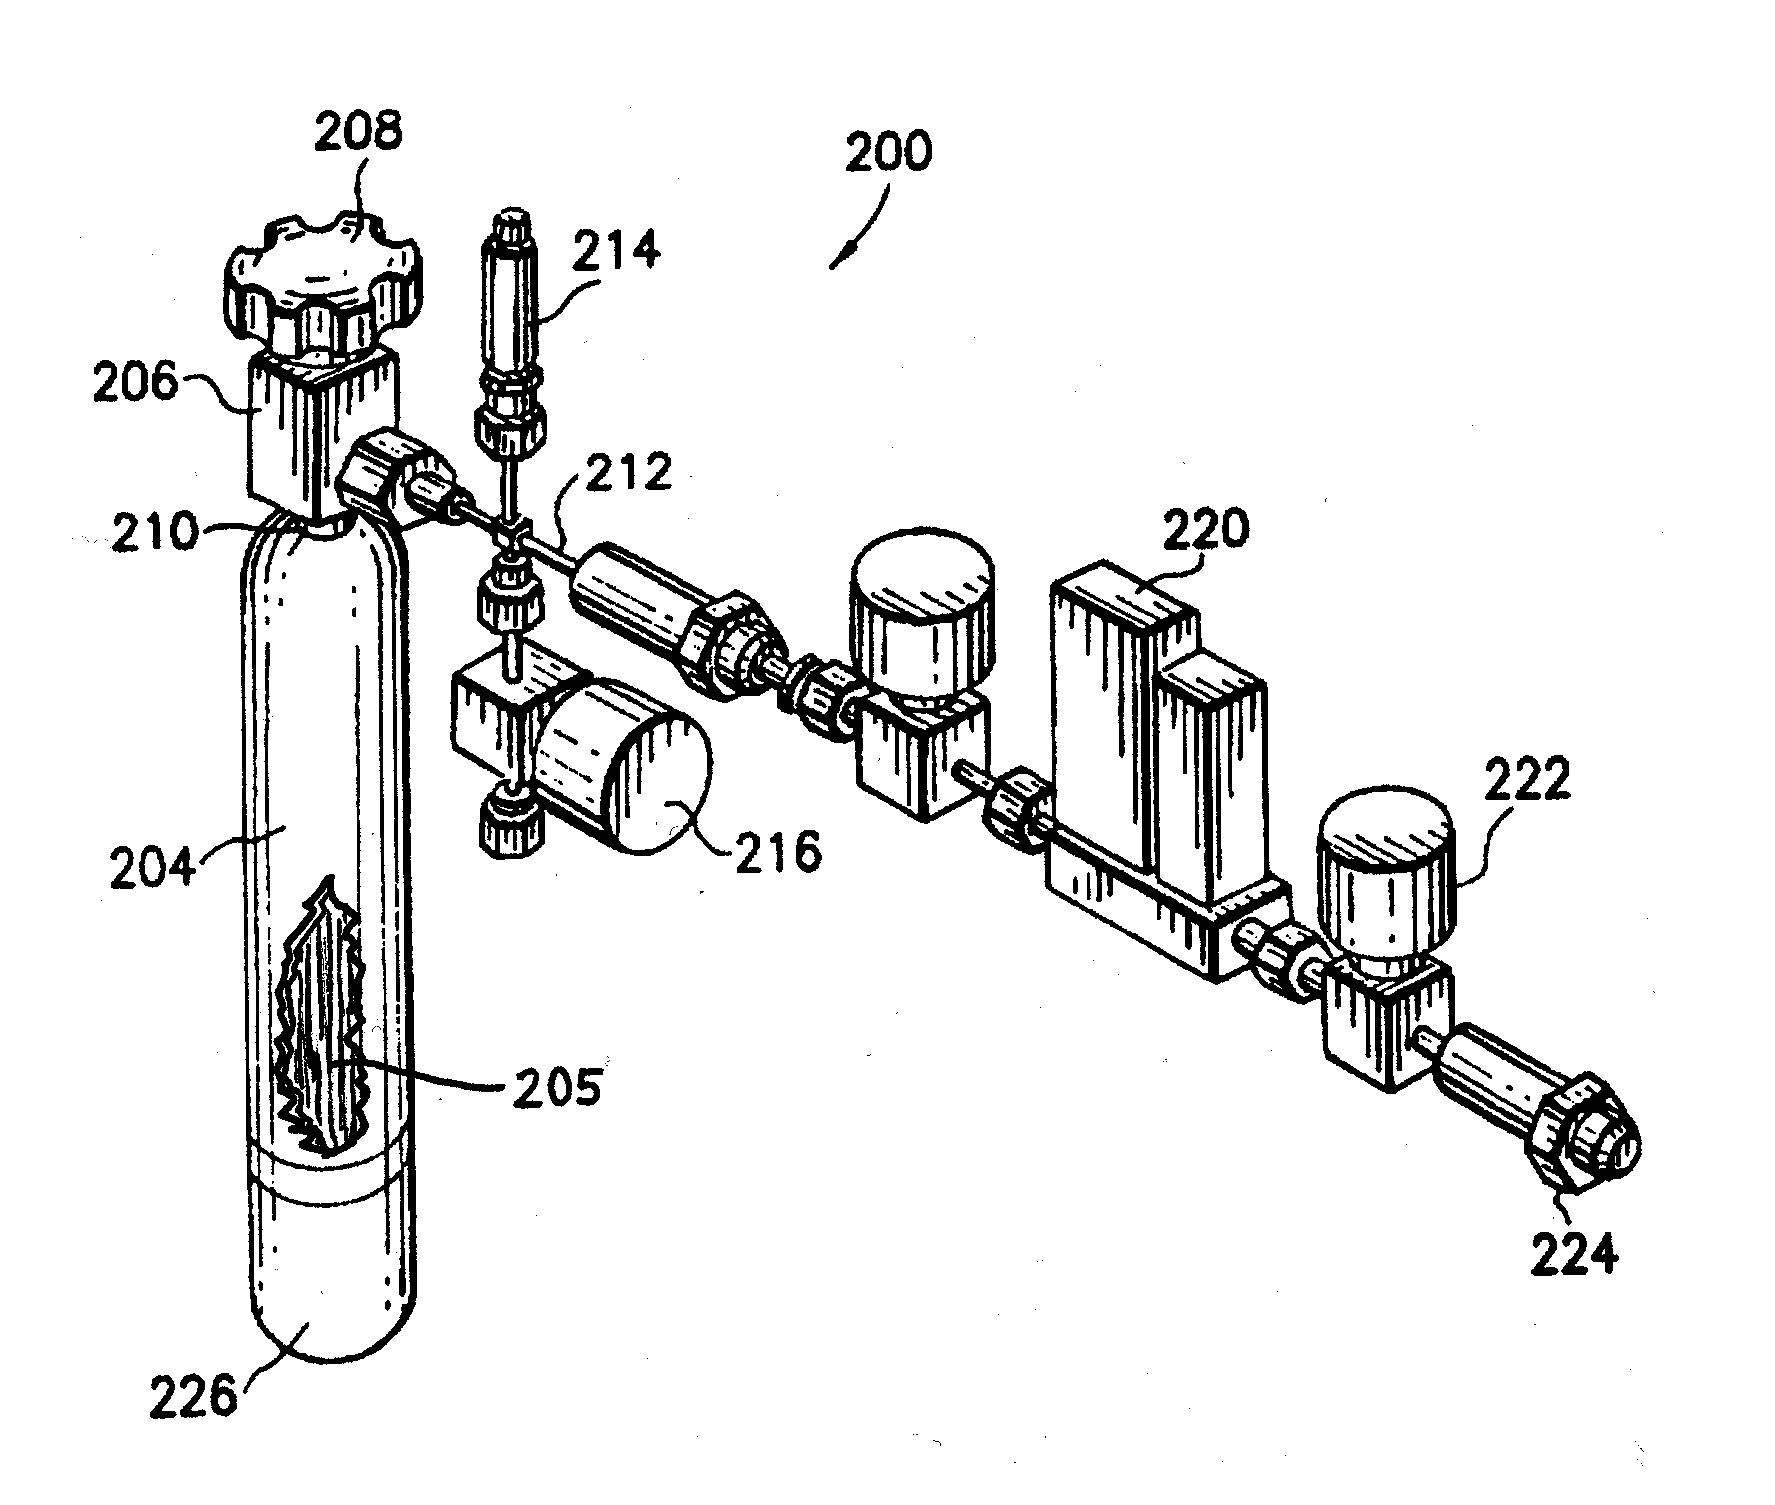 Pvdf pyrolyzate adsorbent and gas storage and dispensing system utilizing same